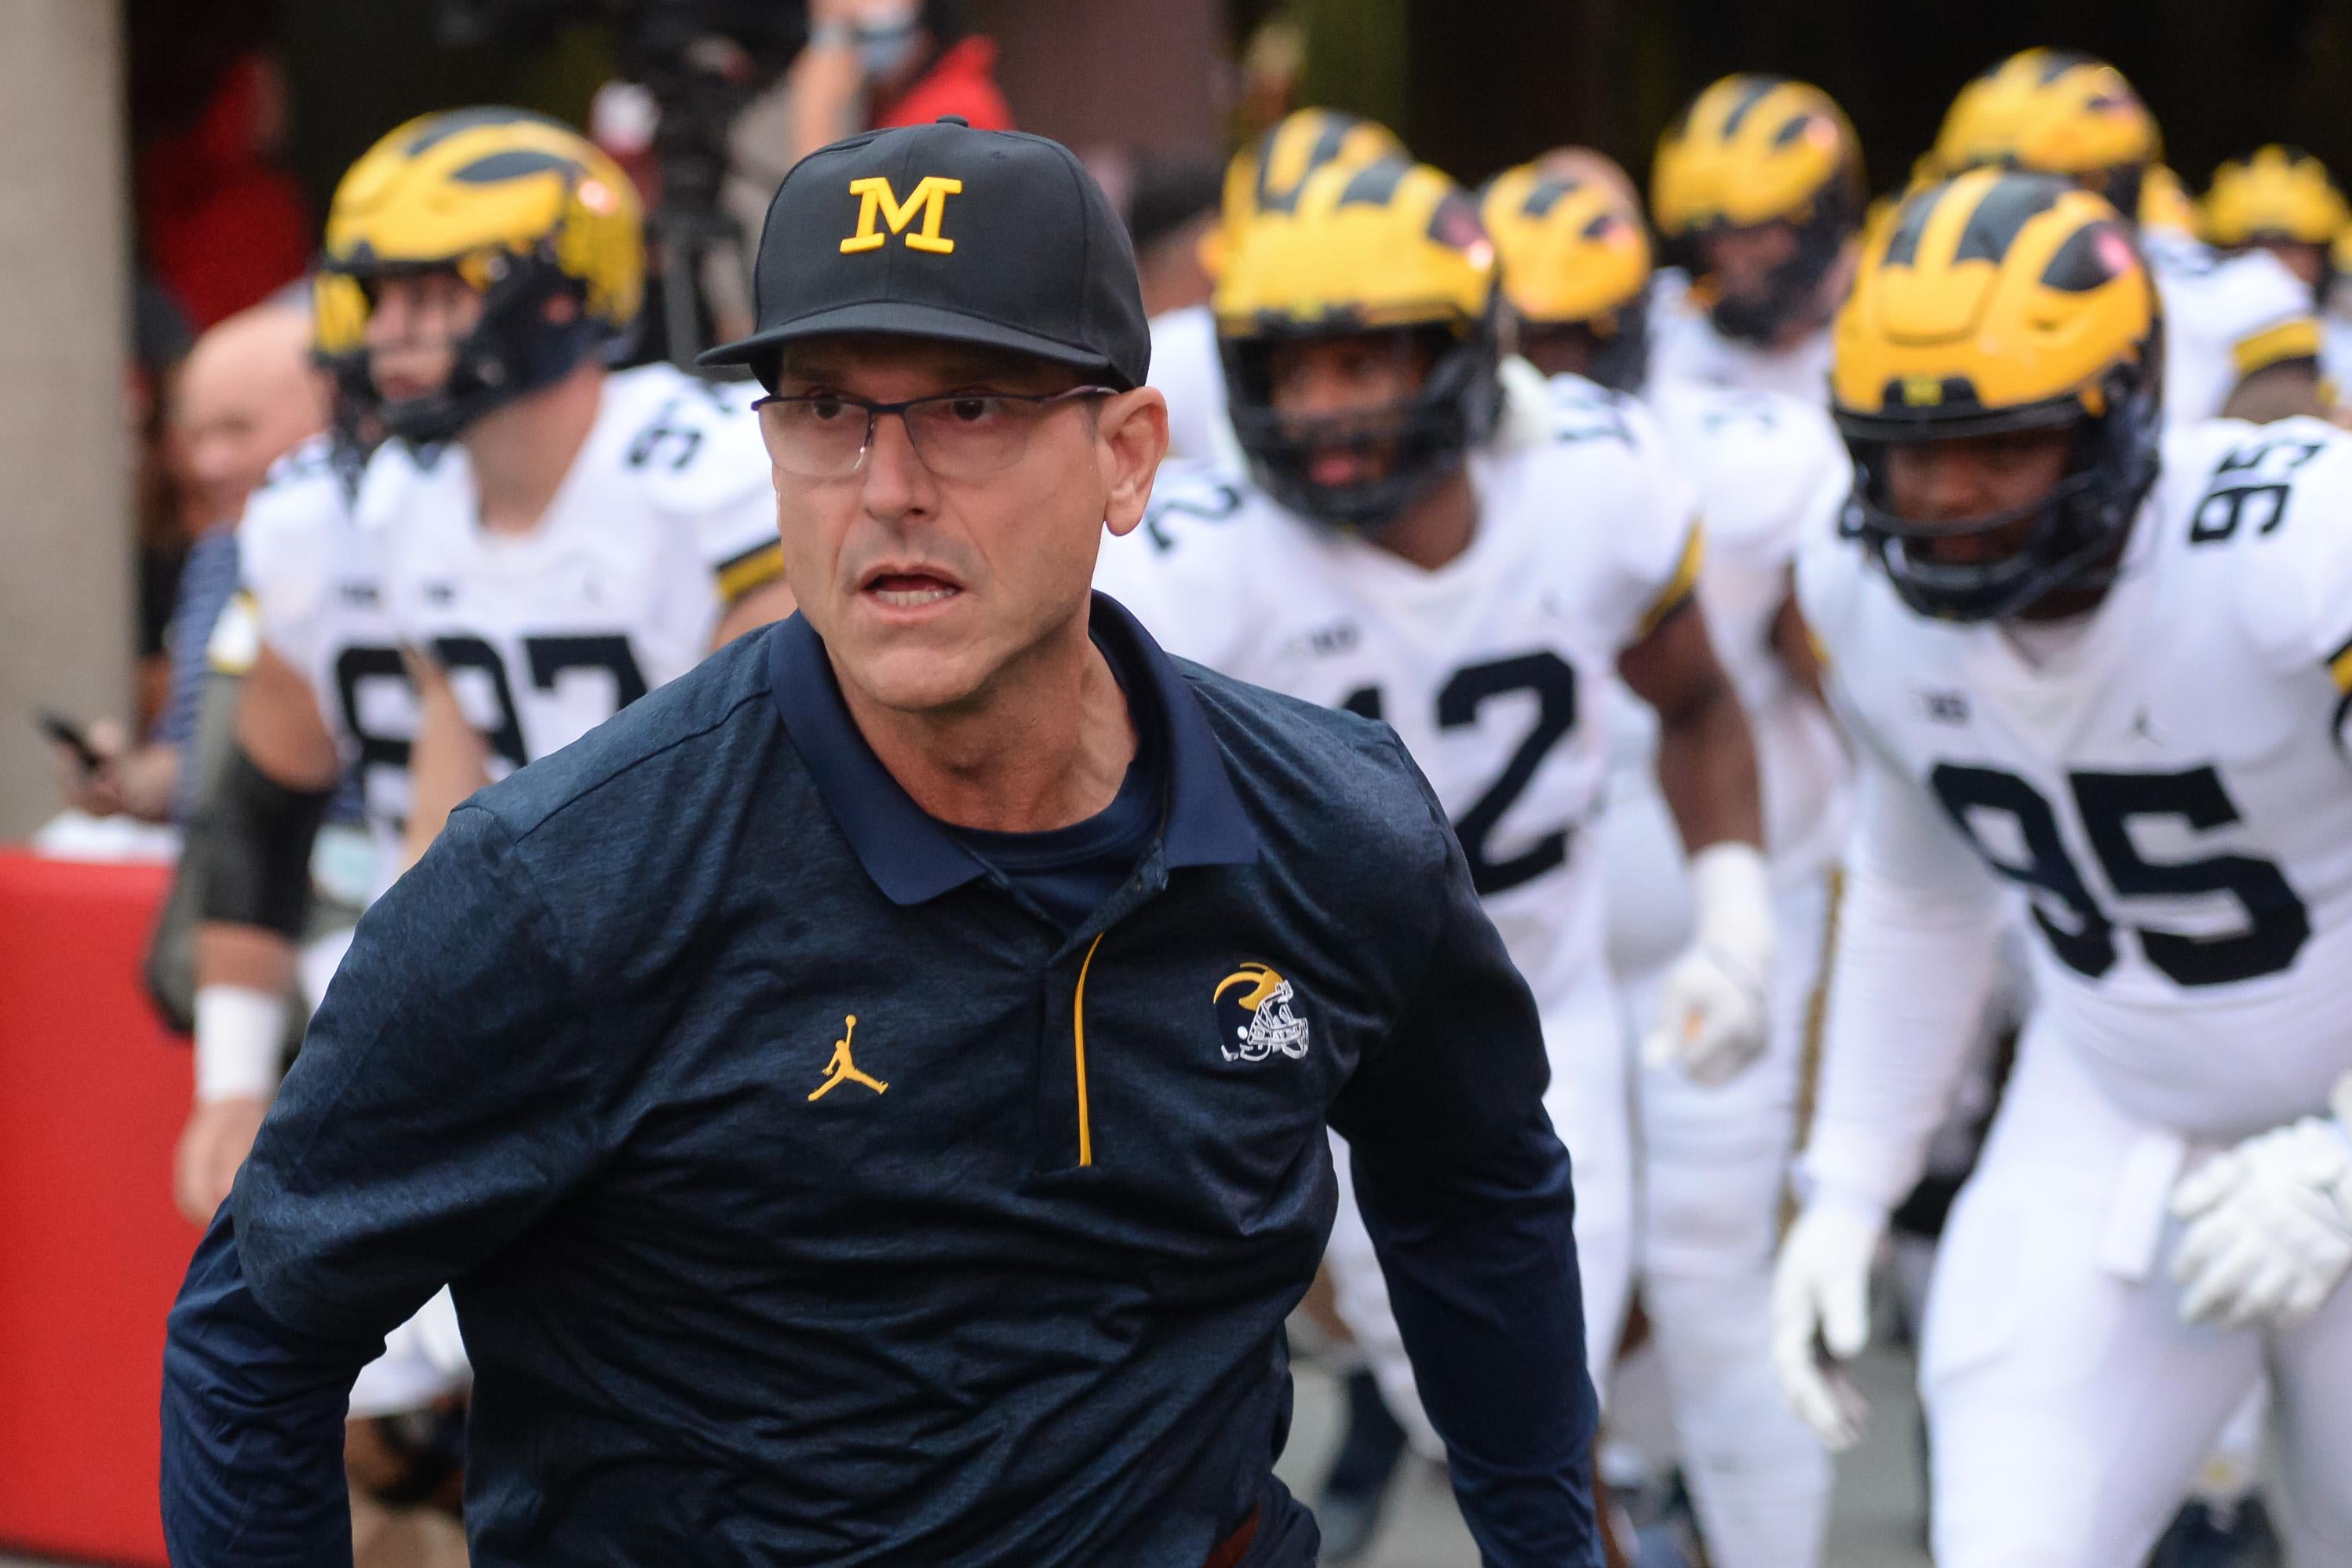 The Rise of Jim Harbaugh A Legacy of Excellence in College Football